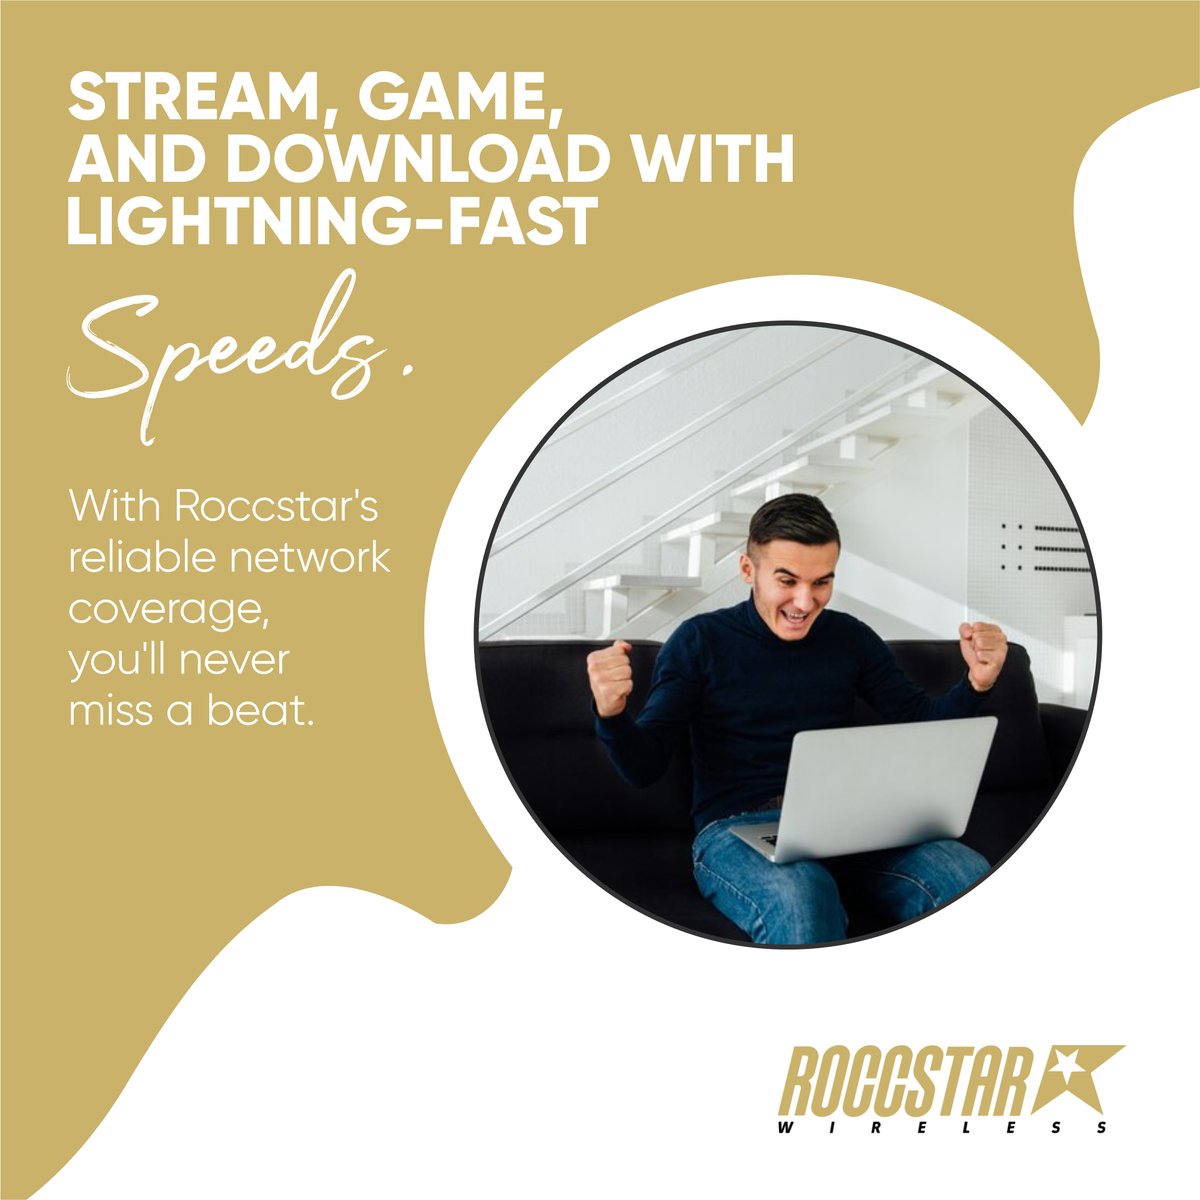 With Roccstar's reliable network coverage, you'll never miss a beat. Upgrade to Roccstar Wireless and stay connected like never before!
-
Contact us now: roccstarwireless.com

#roccstarreliable
#stayconnectedwithroccstar
#crystalclearcalls
#lightningfastdata
#nevermissabeat